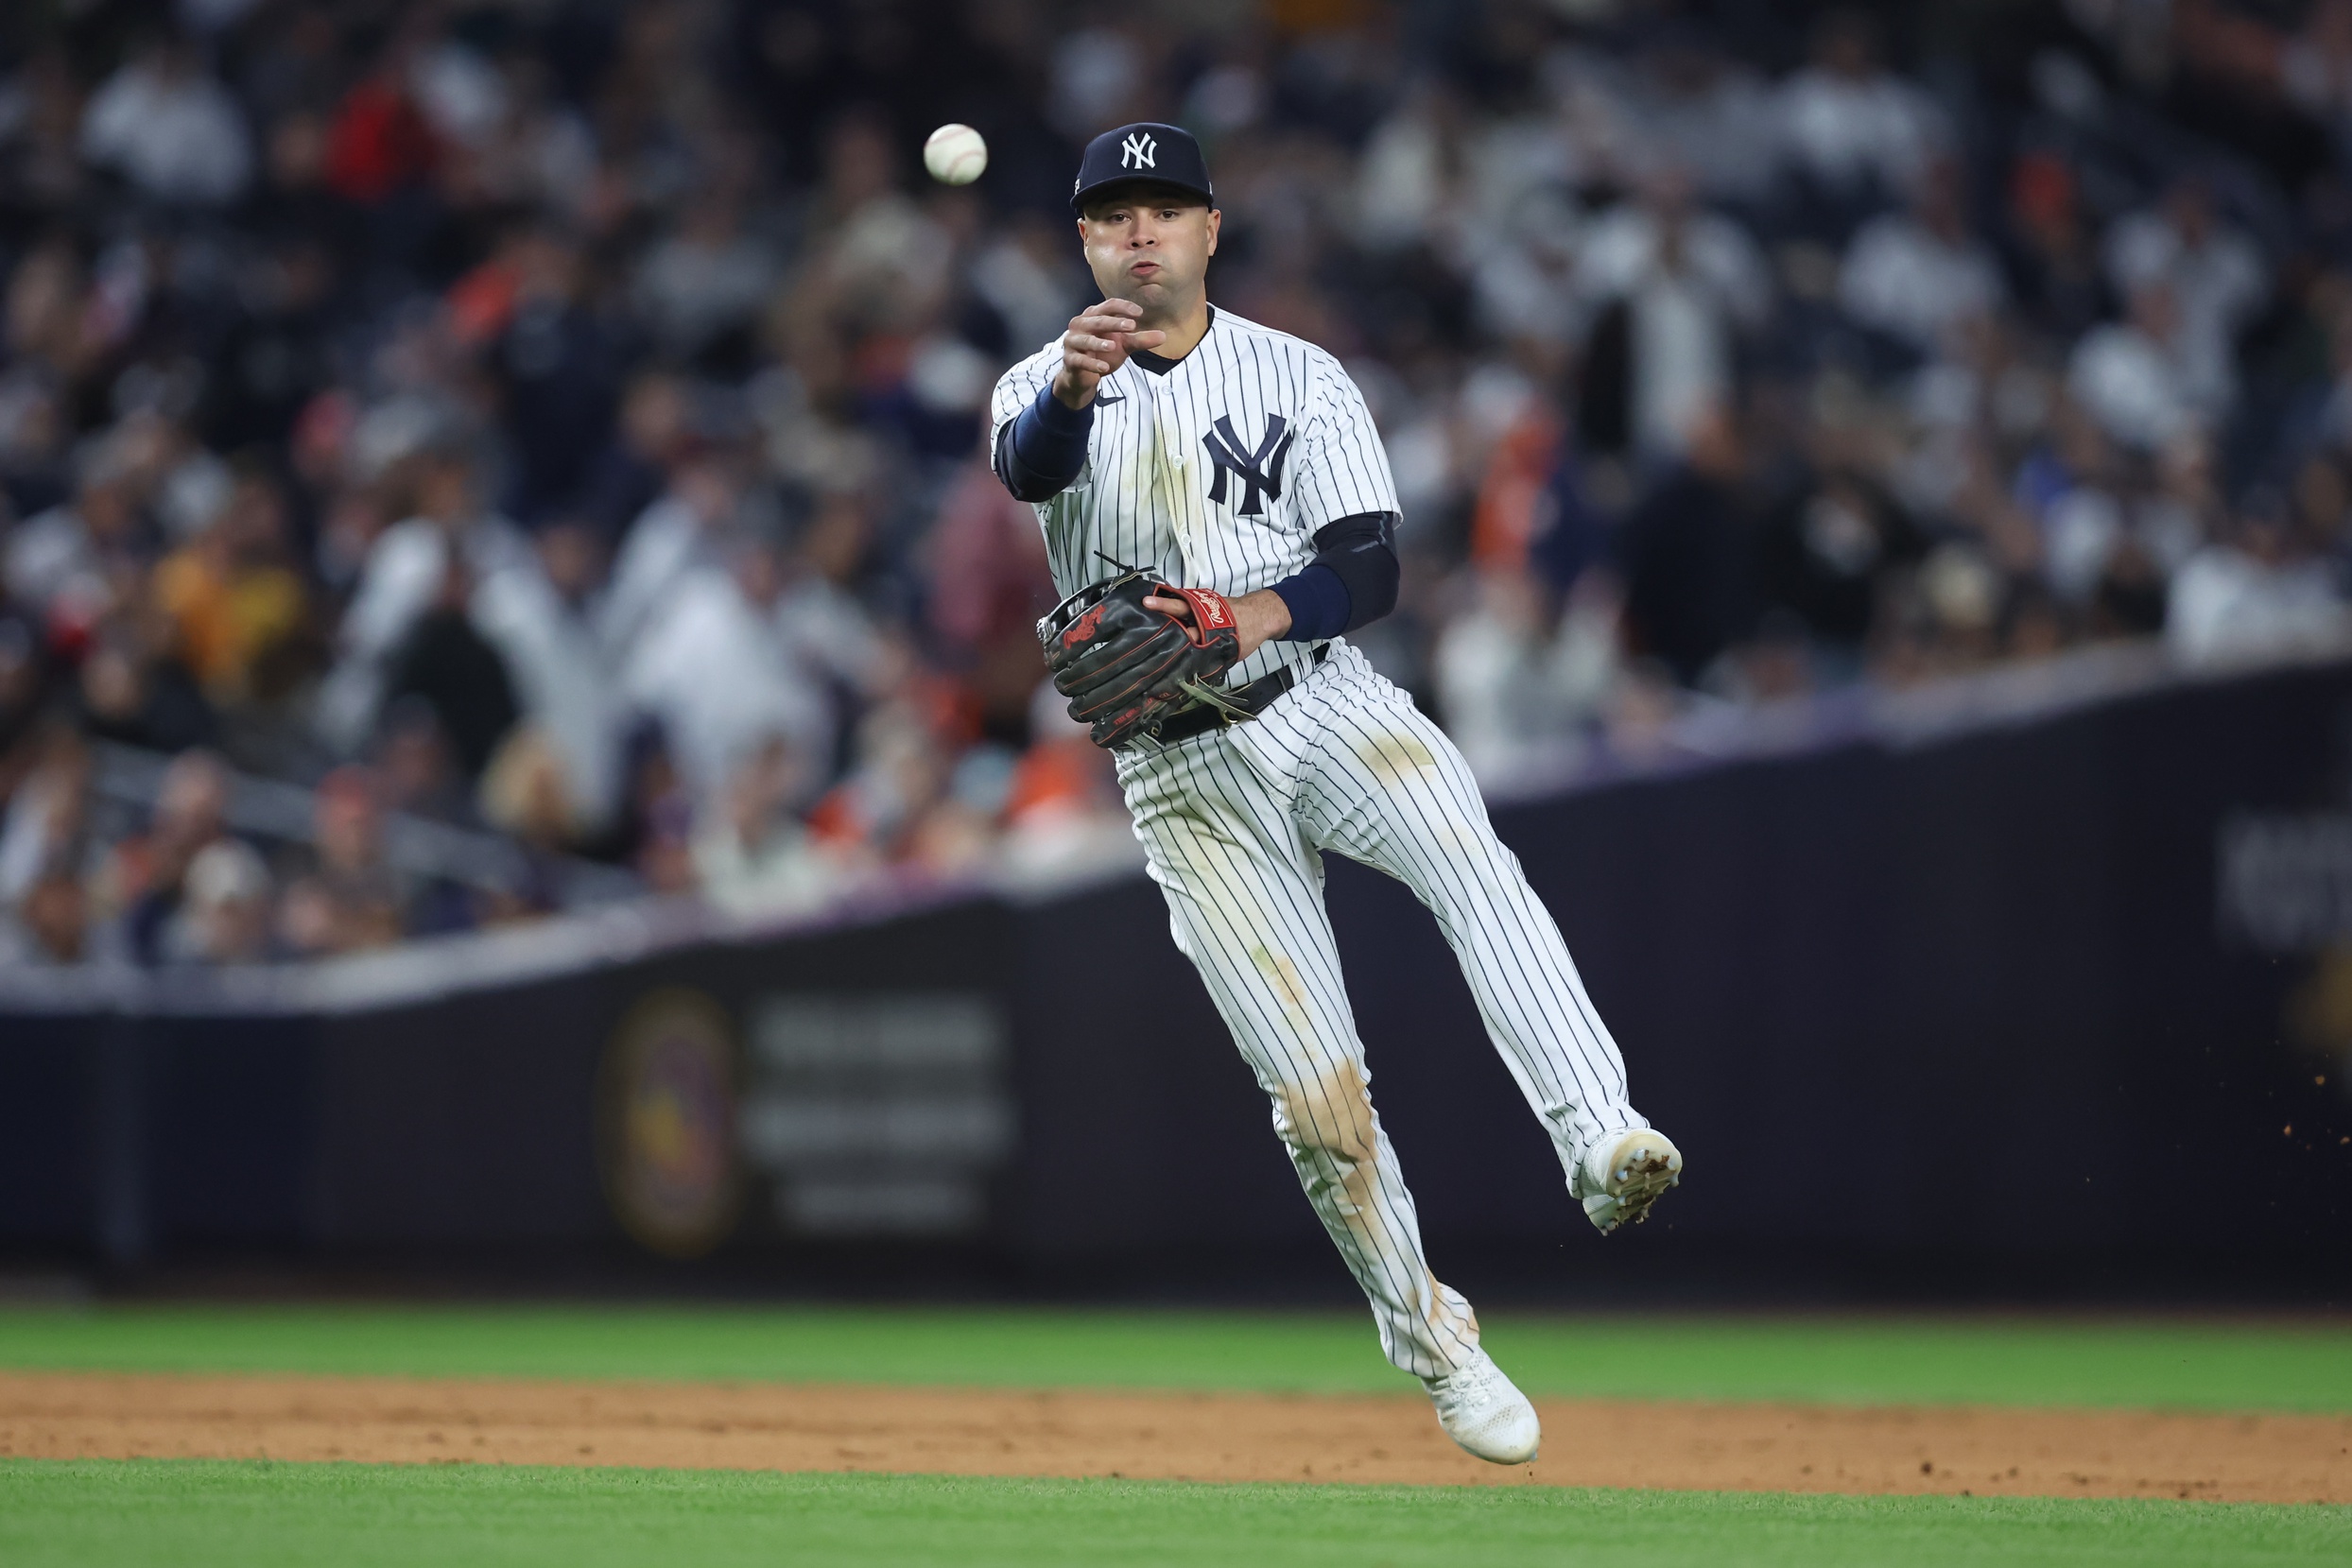 Yankees shortstop Isiah Kiner-Falefa's hot start a credit to swing changes  - Pinstripe Alley